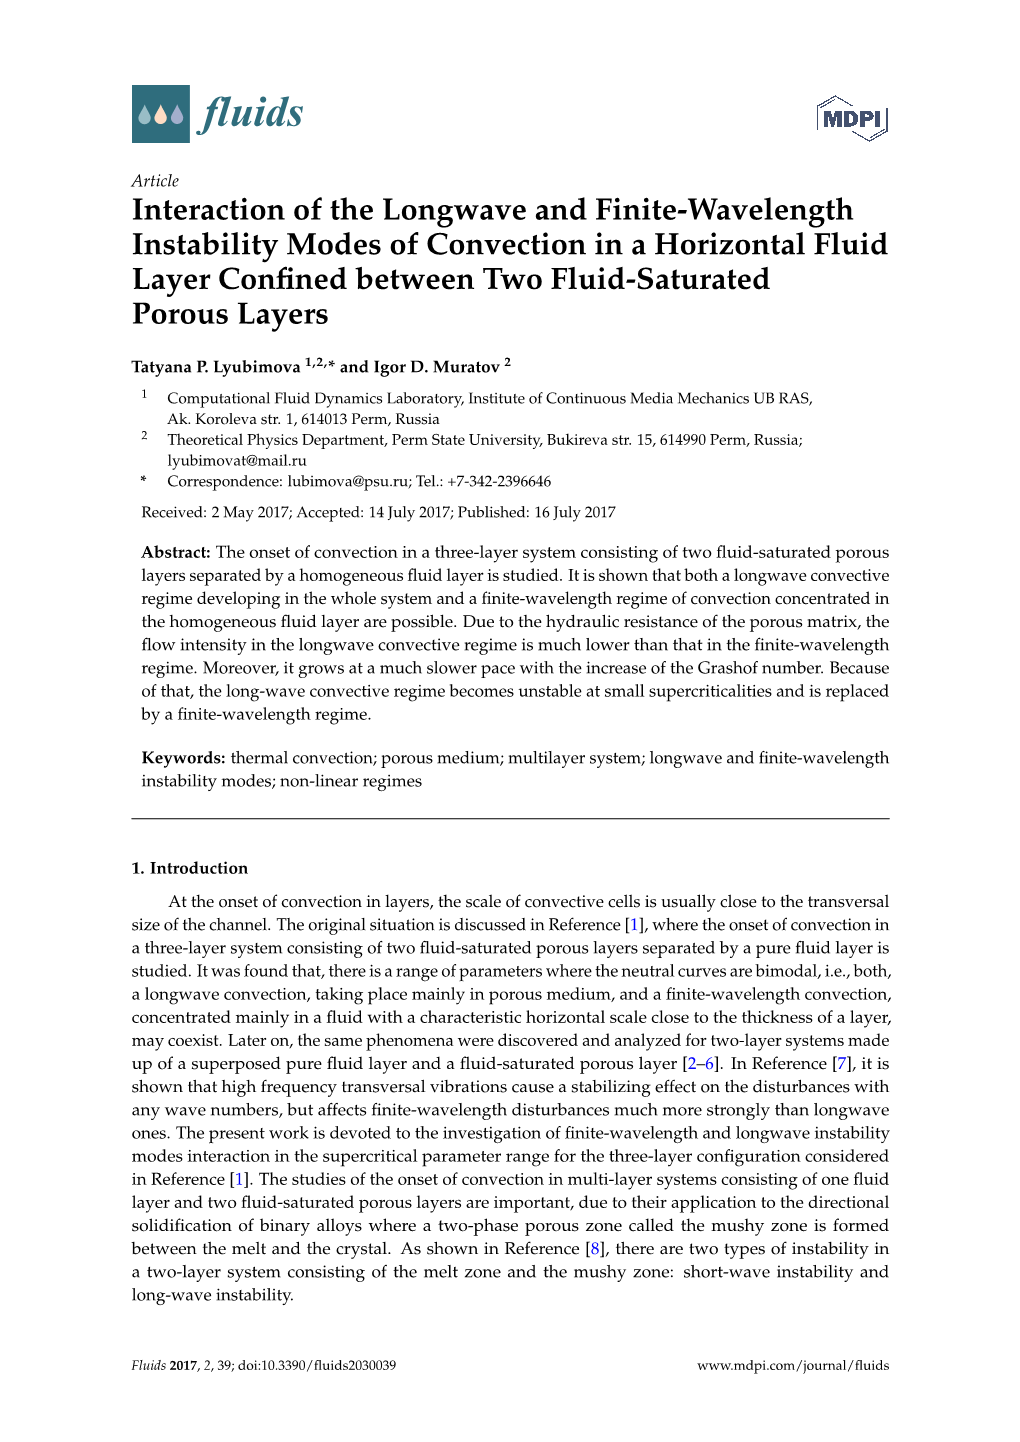 Interaction of the Longwave and Finite-Wavelength Instability Modes of Convection in a Horizontal Fluid Layer Conﬁned Between Two Fluid-Saturated Porous Layers